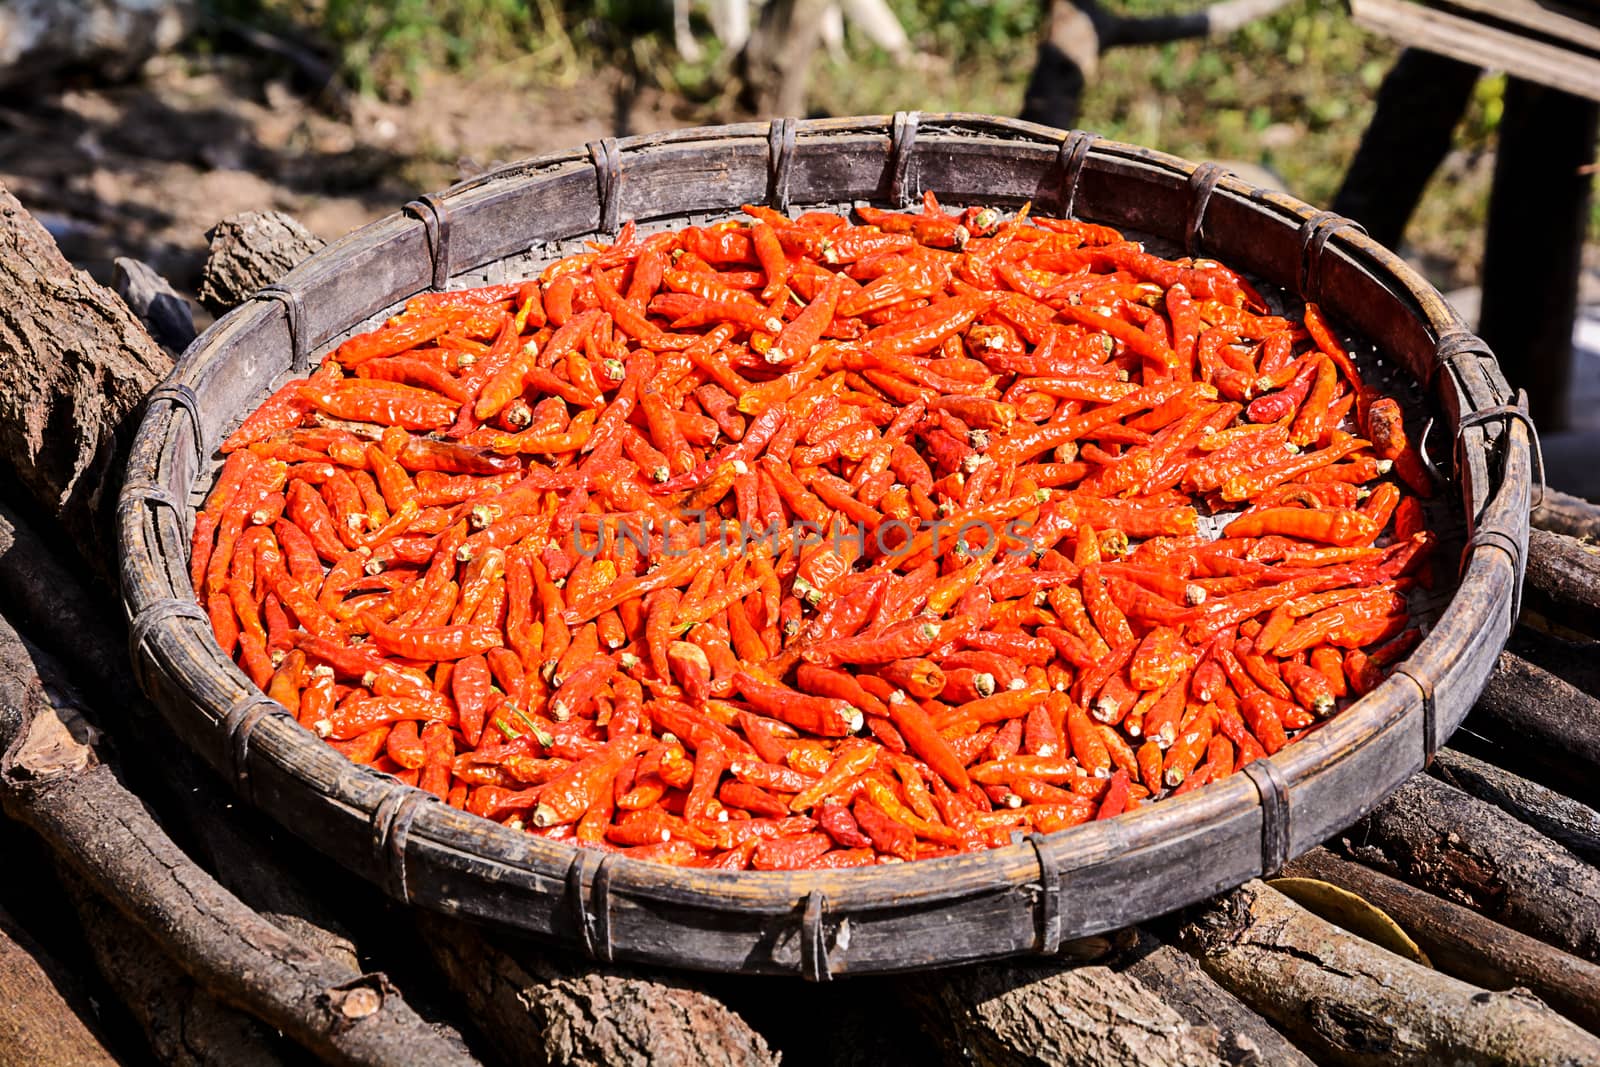 Chili dried in the bamboo basket by NuwatPhoto